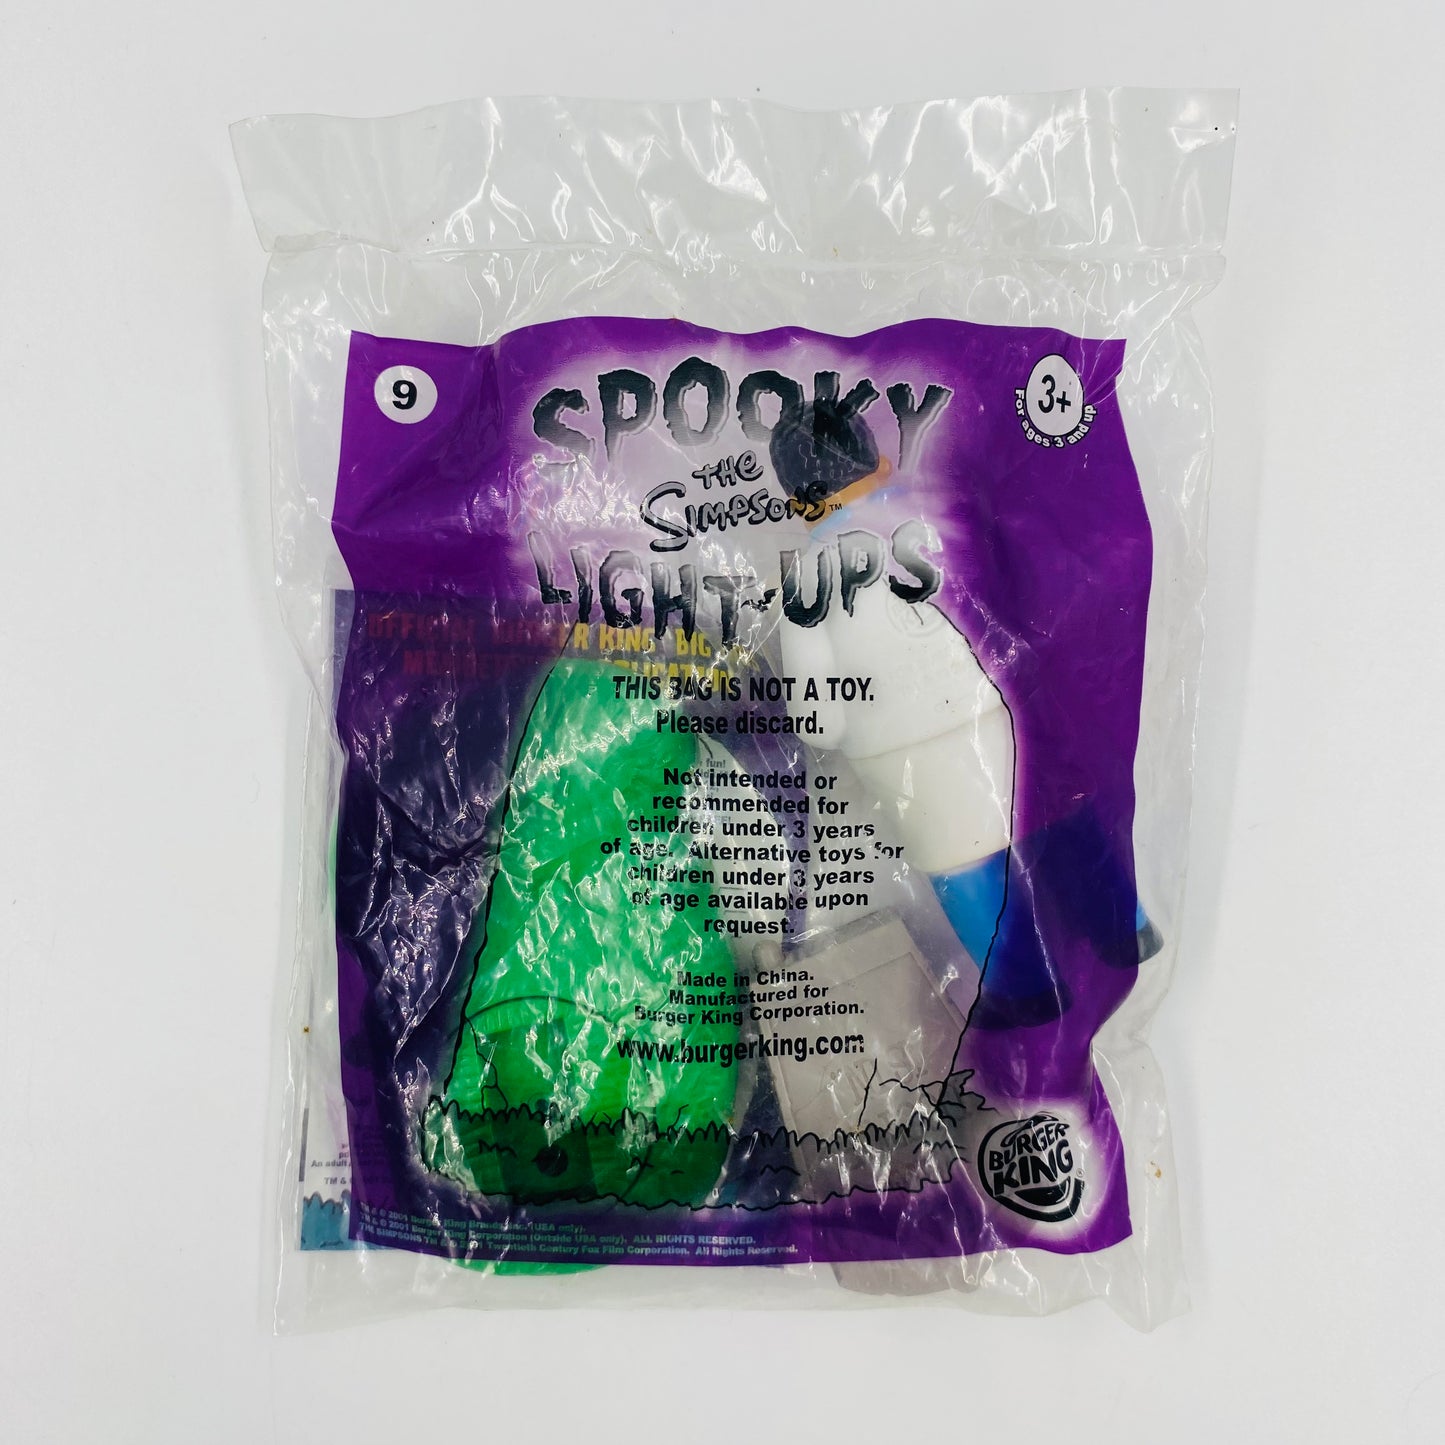 The Simpsons Spooky Light-Ups Dr. Hibbert Burger King Kids' Meals toy (2001) bagged